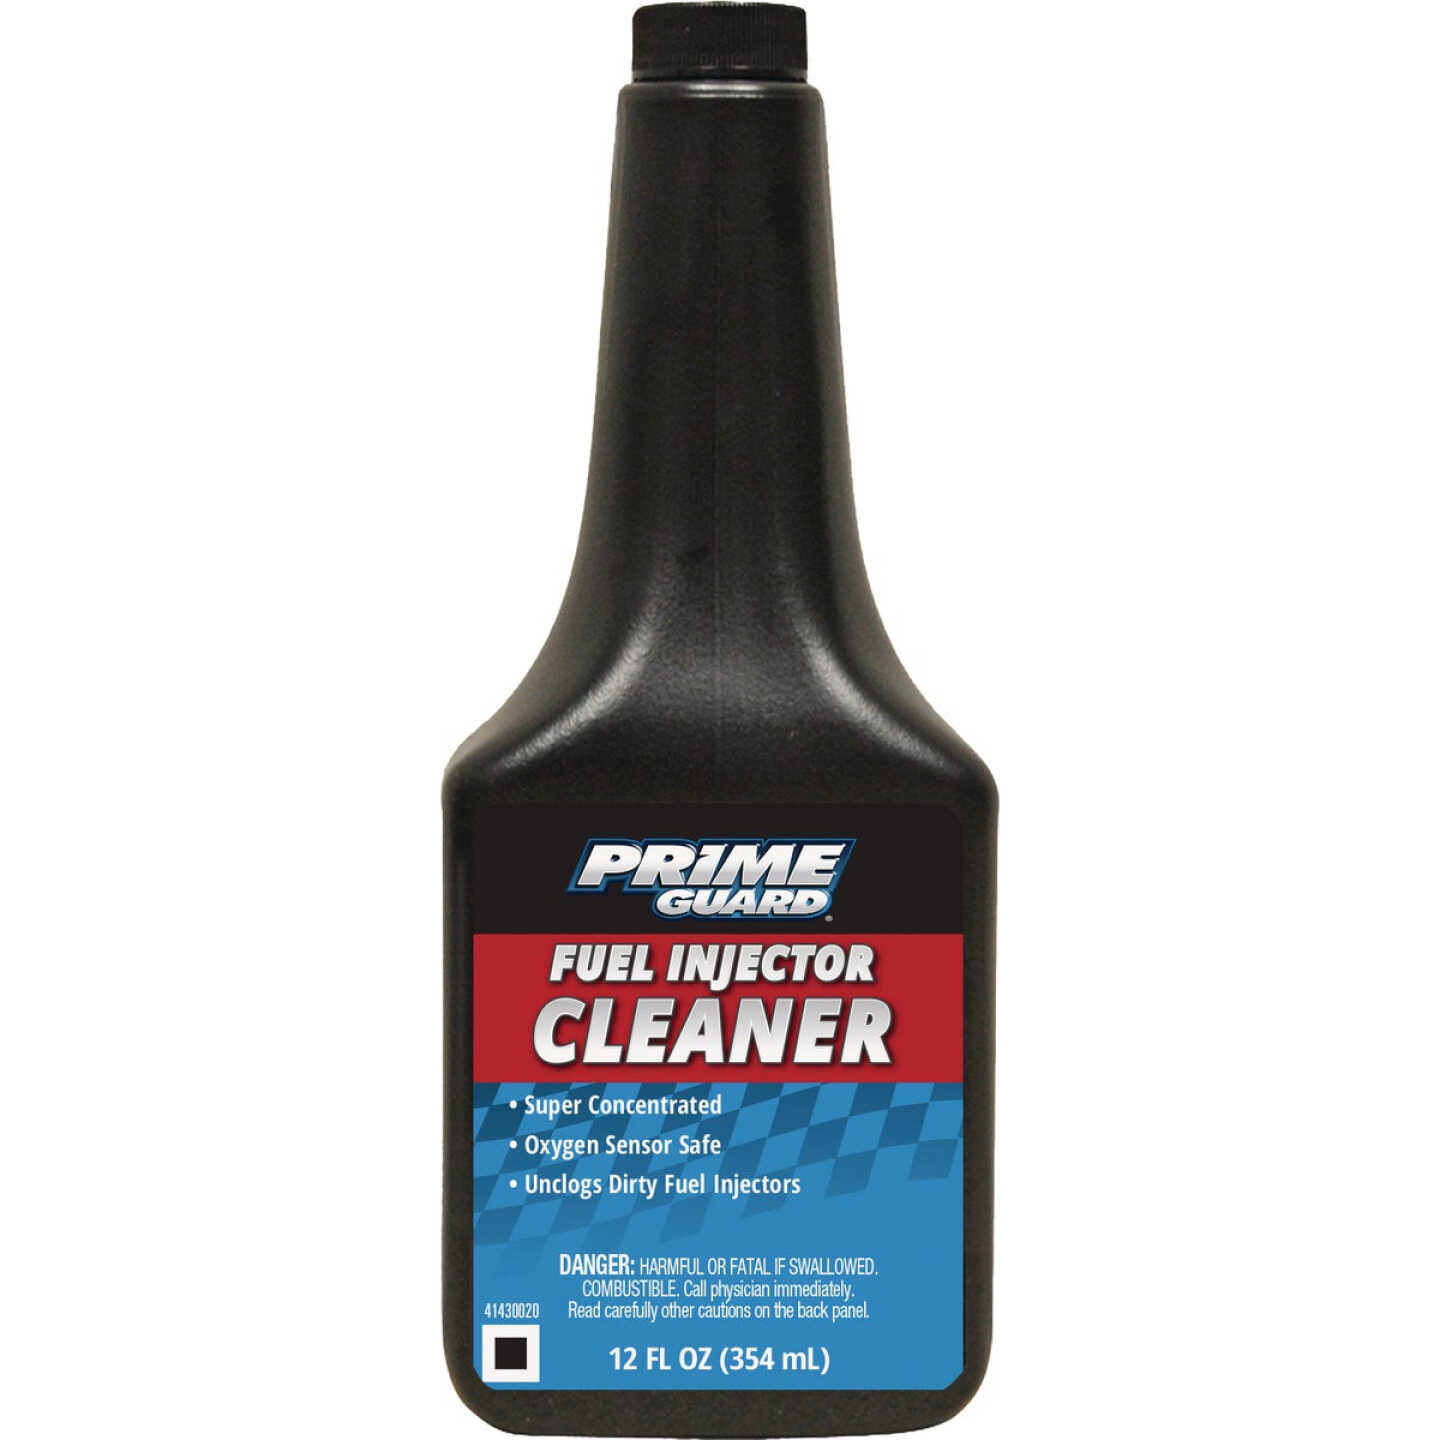 STP Super Concentrated Fuel Injector Cleaner 12/5.25 oz. 